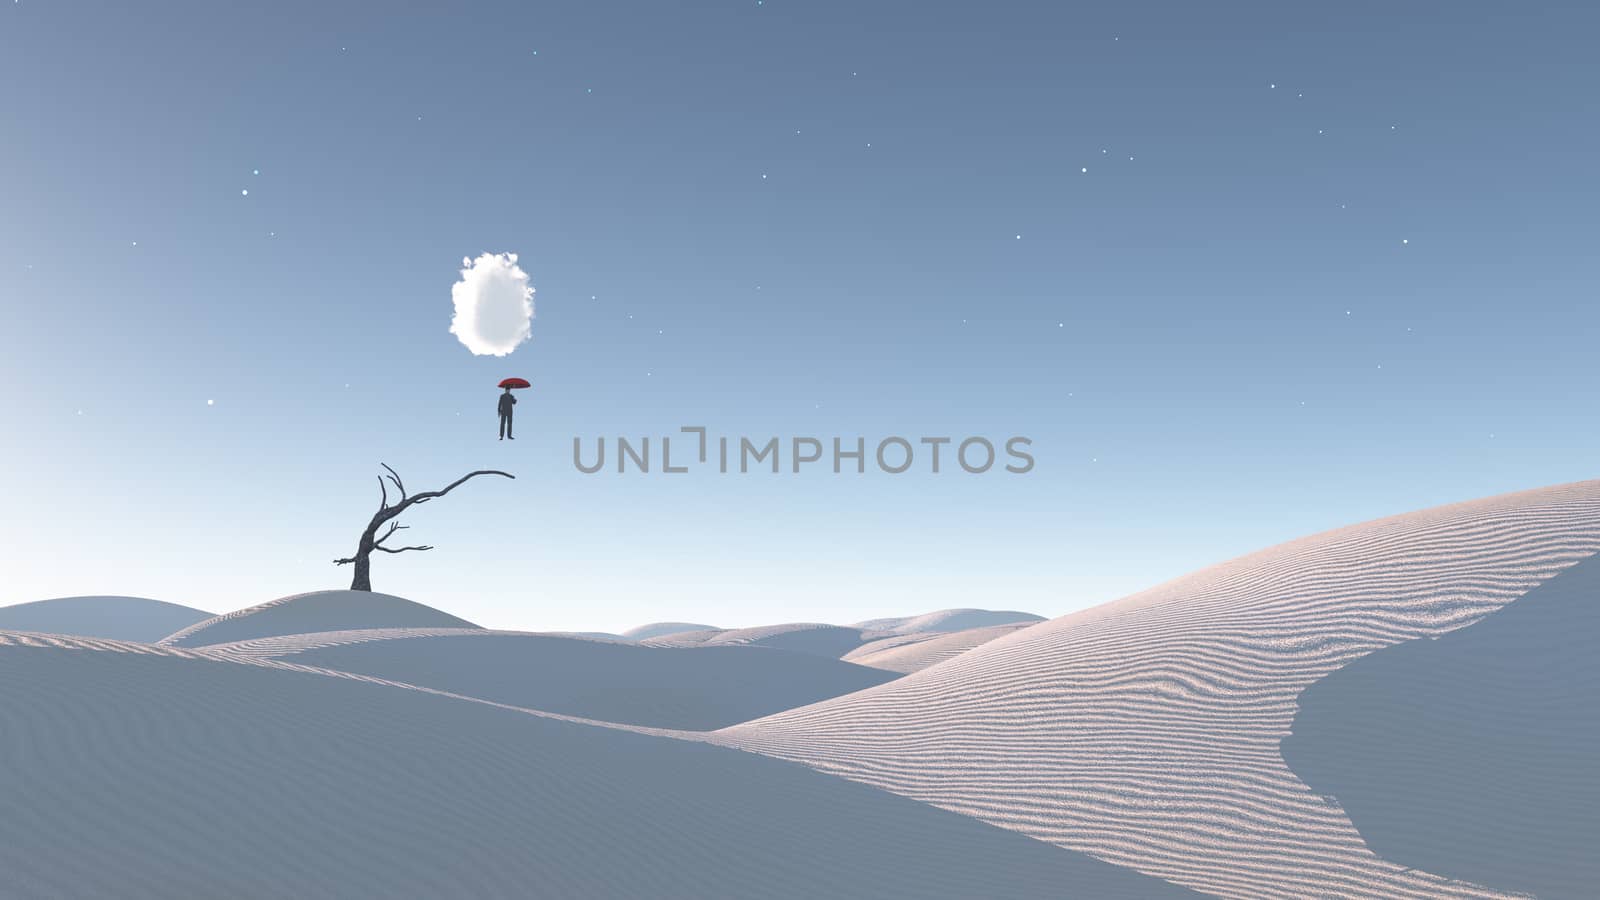 Man Floats in mid air in surreal desert landscape